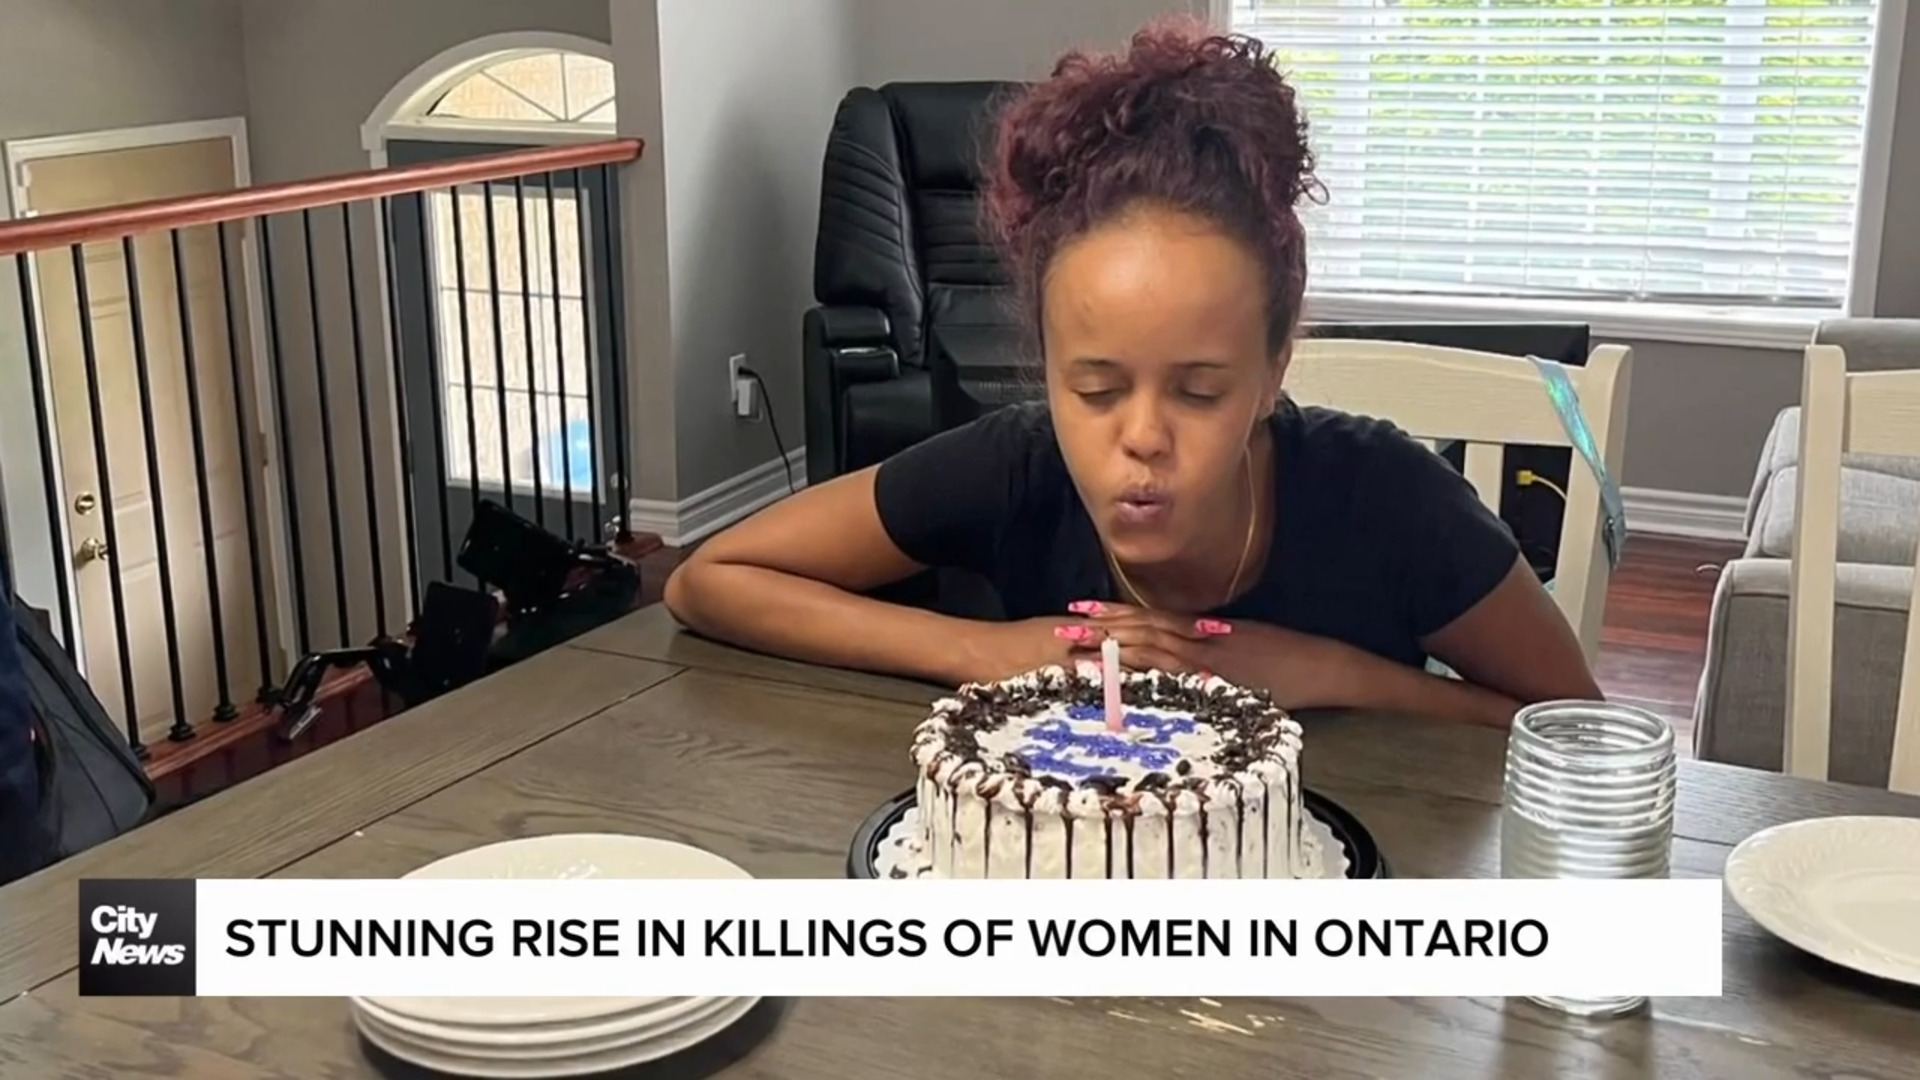 Tracking a stunning rise in killings of women in Ontario